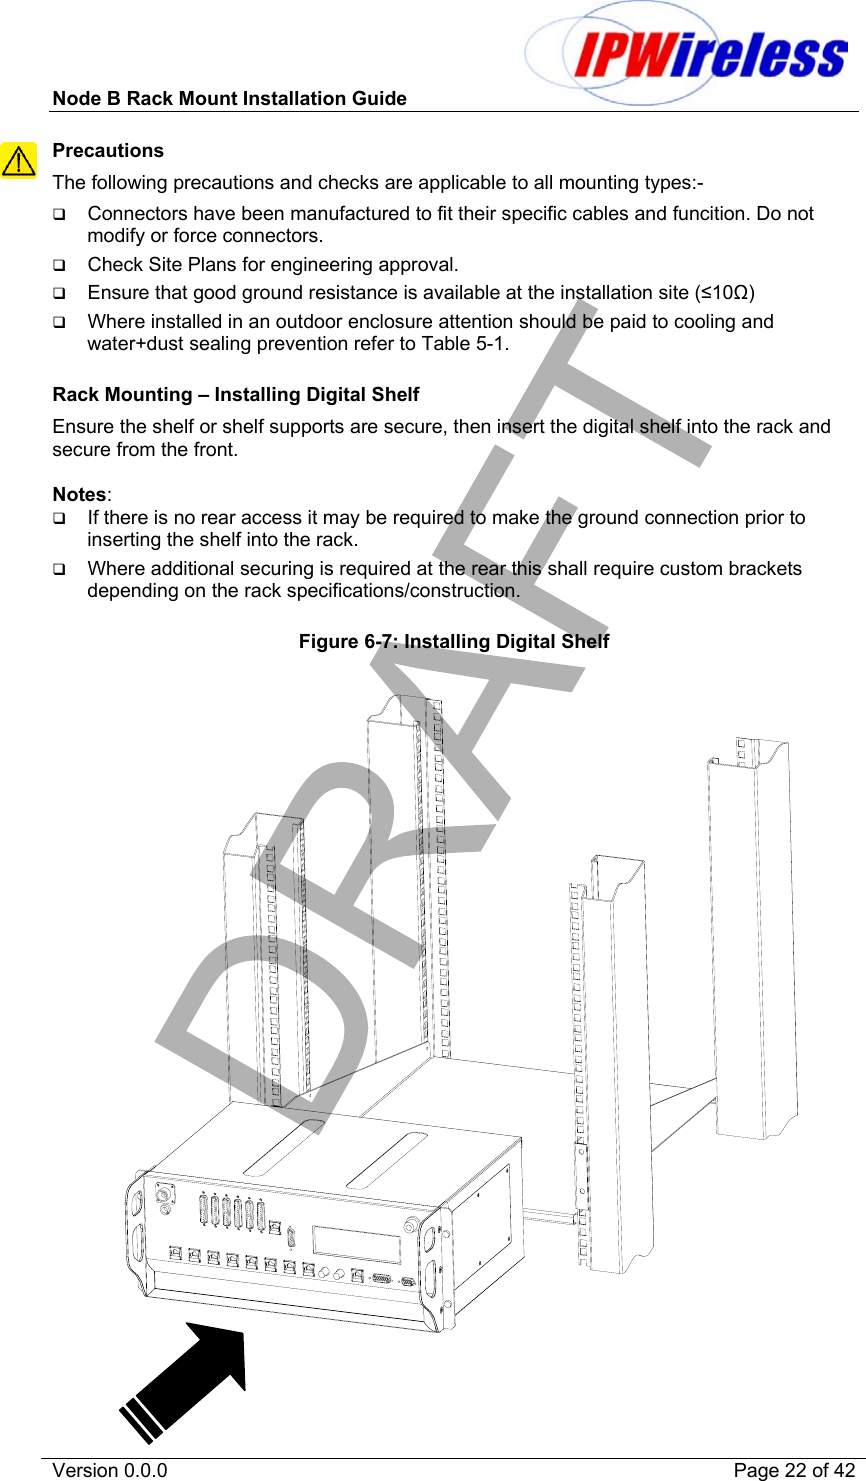 Node B Rack Mount Installation Guide                           Version 0.0.0    Page 22 of 42 Precautions The following precautions and checks are applicable to all mounting types:-   Connectors have been manufactured to fit their specific cables and funcition. Do not modify or force connectors.   Check Site Plans for engineering approval.   Ensure that good ground resistance is available at the installation site (≤10Ω)   Where installed in an outdoor enclosure attention should be paid to cooling and water+dust sealing prevention refer to Table 5-1.  Rack Mounting – Installing Digital Shelf Ensure the shelf or shelf supports are secure, then insert the digital shelf into the rack and secure from the front.  Notes:    If there is no rear access it may be required to make the ground connection prior to inserting the shelf into the rack.   Where additional securing is required at the rear this shall require custom brackets depending on the rack specifications/construction.  Figure 6-7: Installing Digital Shelf              